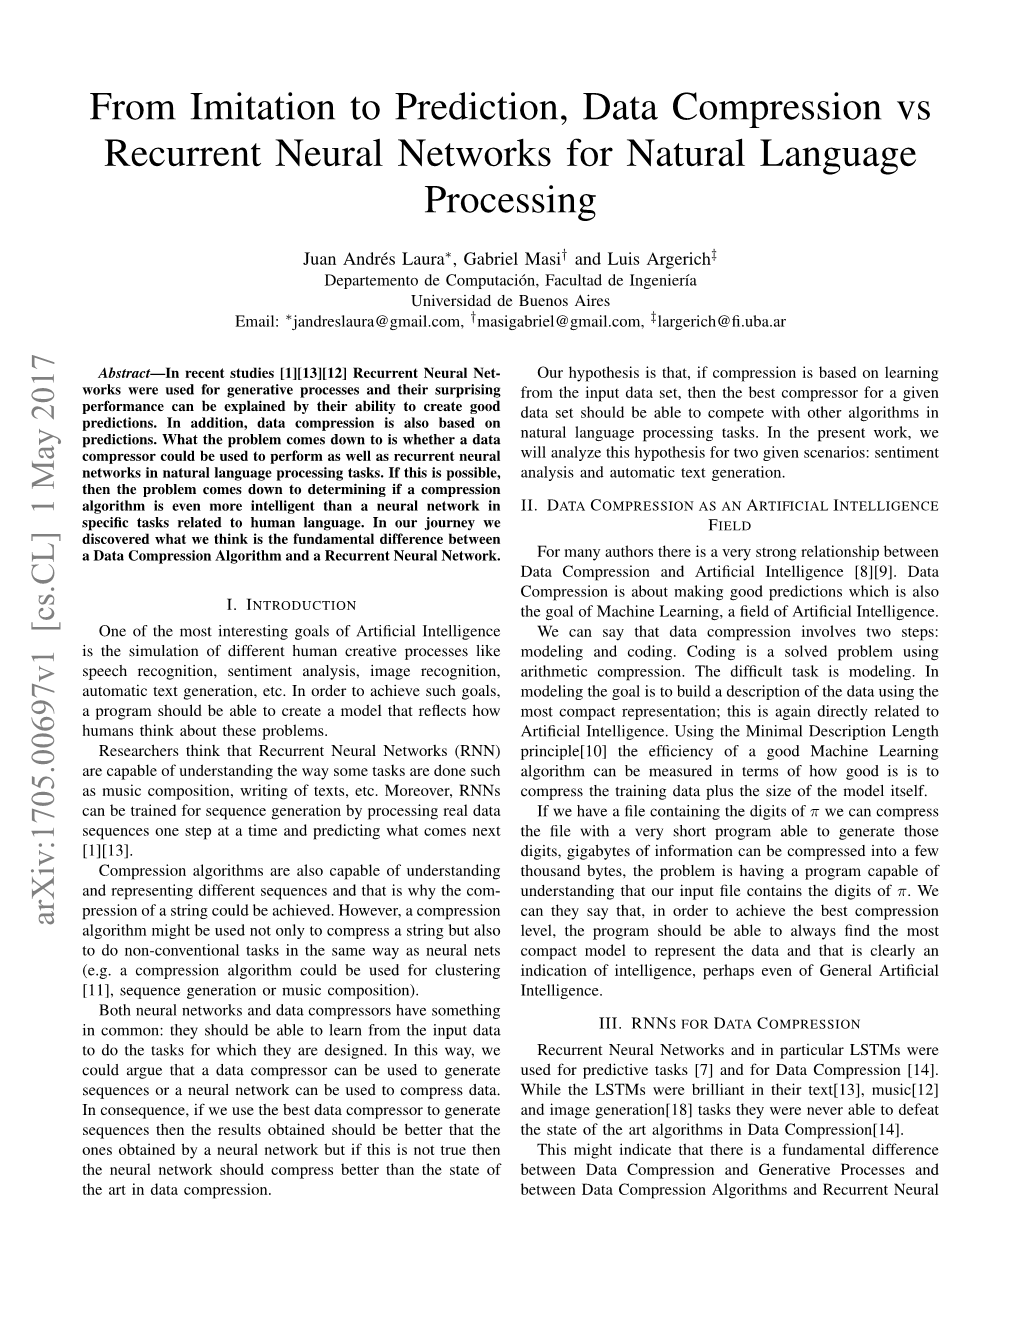 From Imitation to Prediction, Data Compression Vs Recurrent Neural Networks for Natural Language Processing